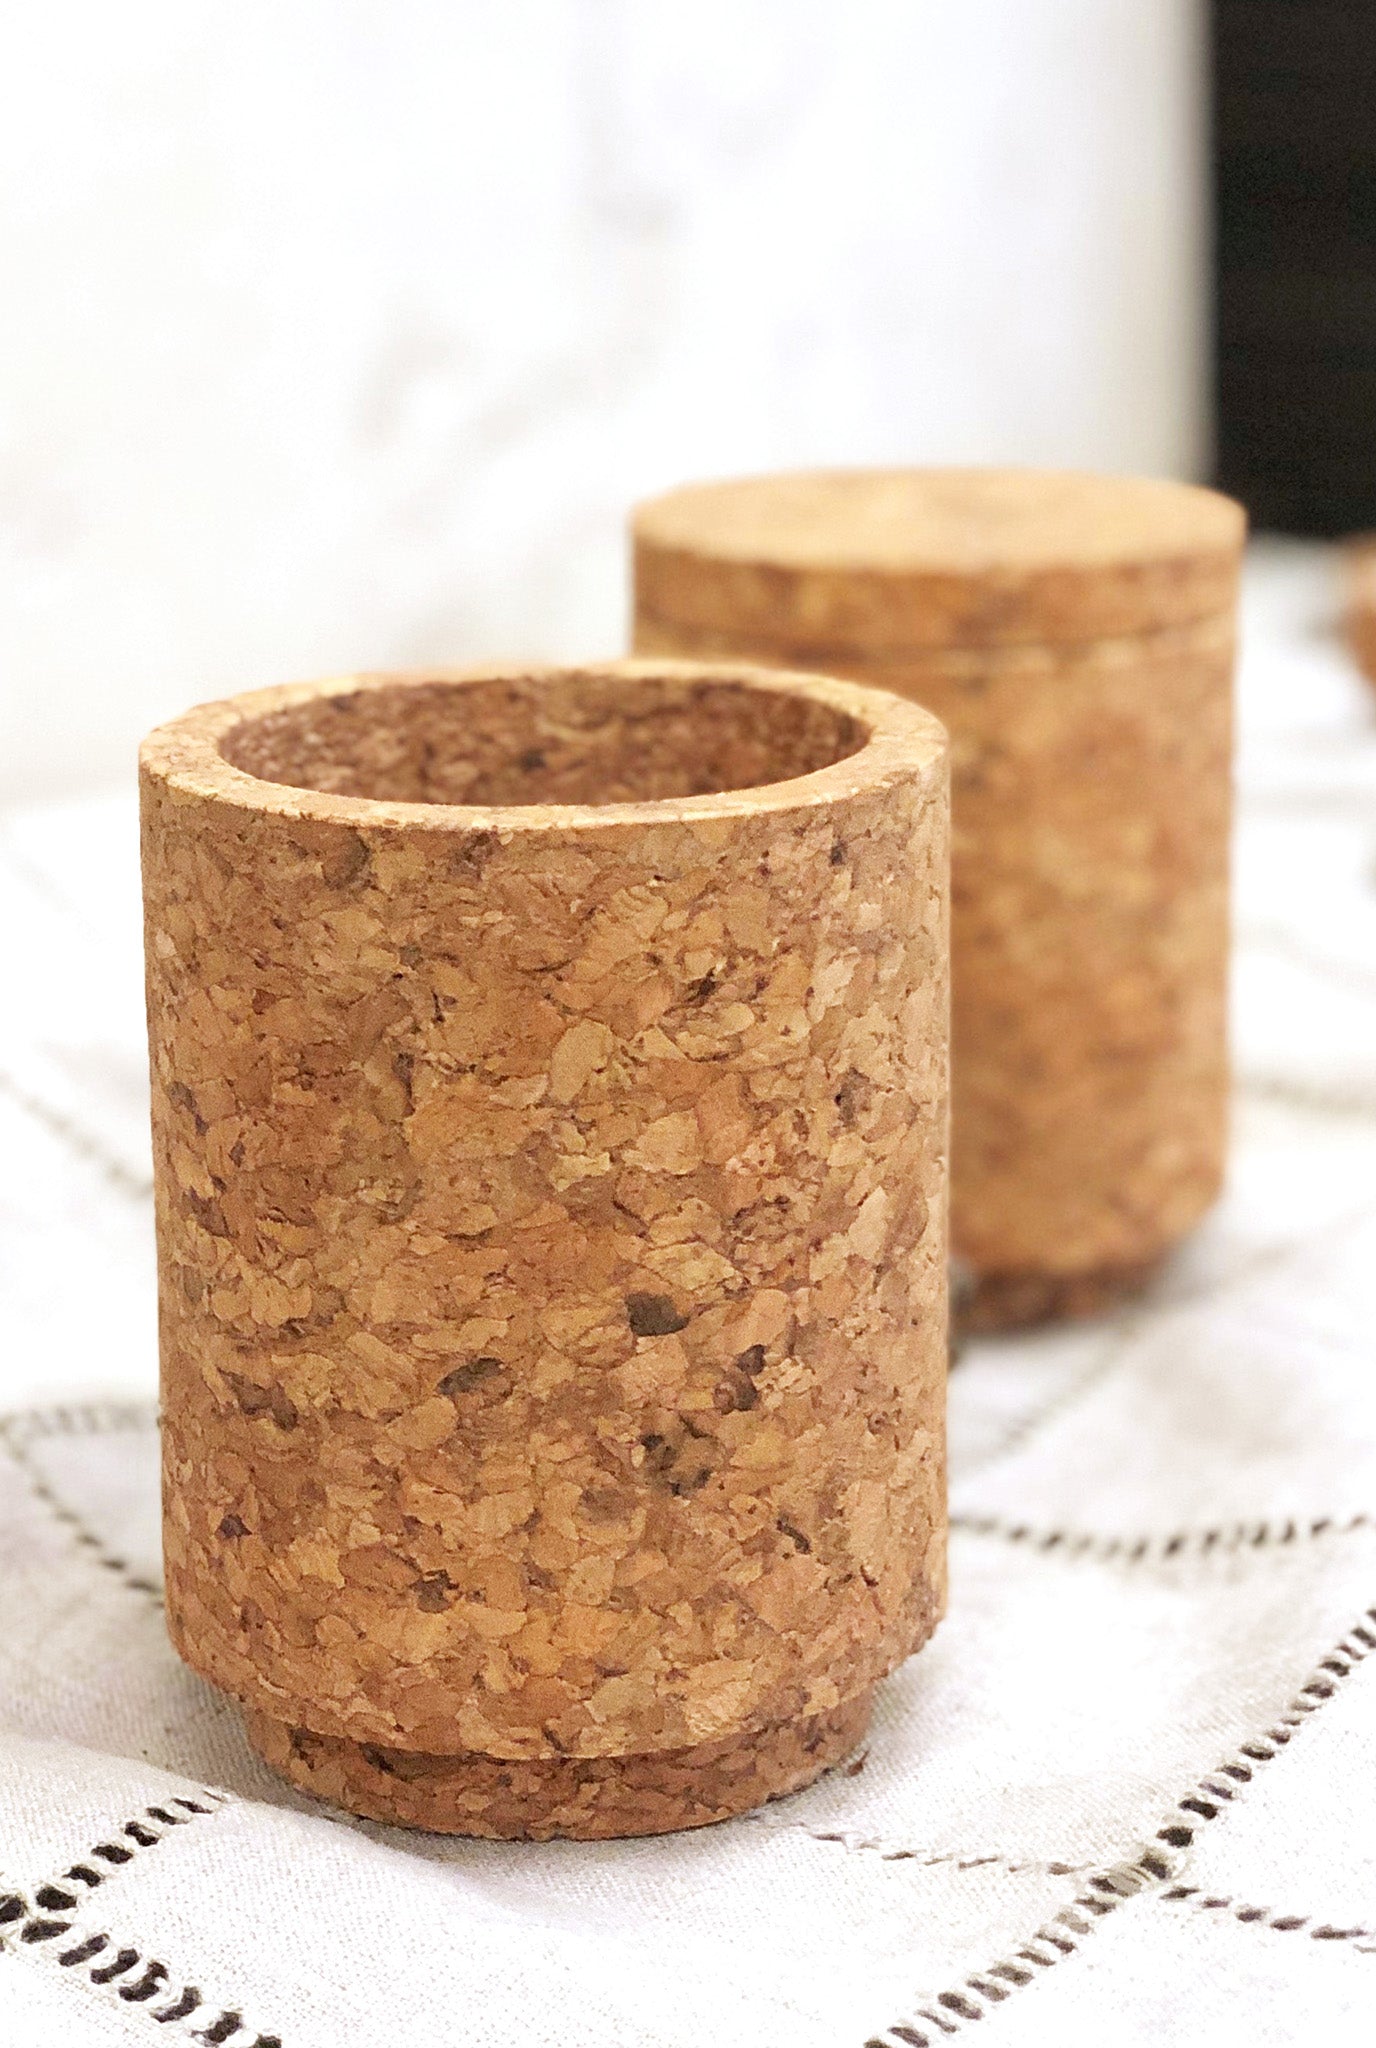 containers-jodi-cork-sustainable-biodegradable